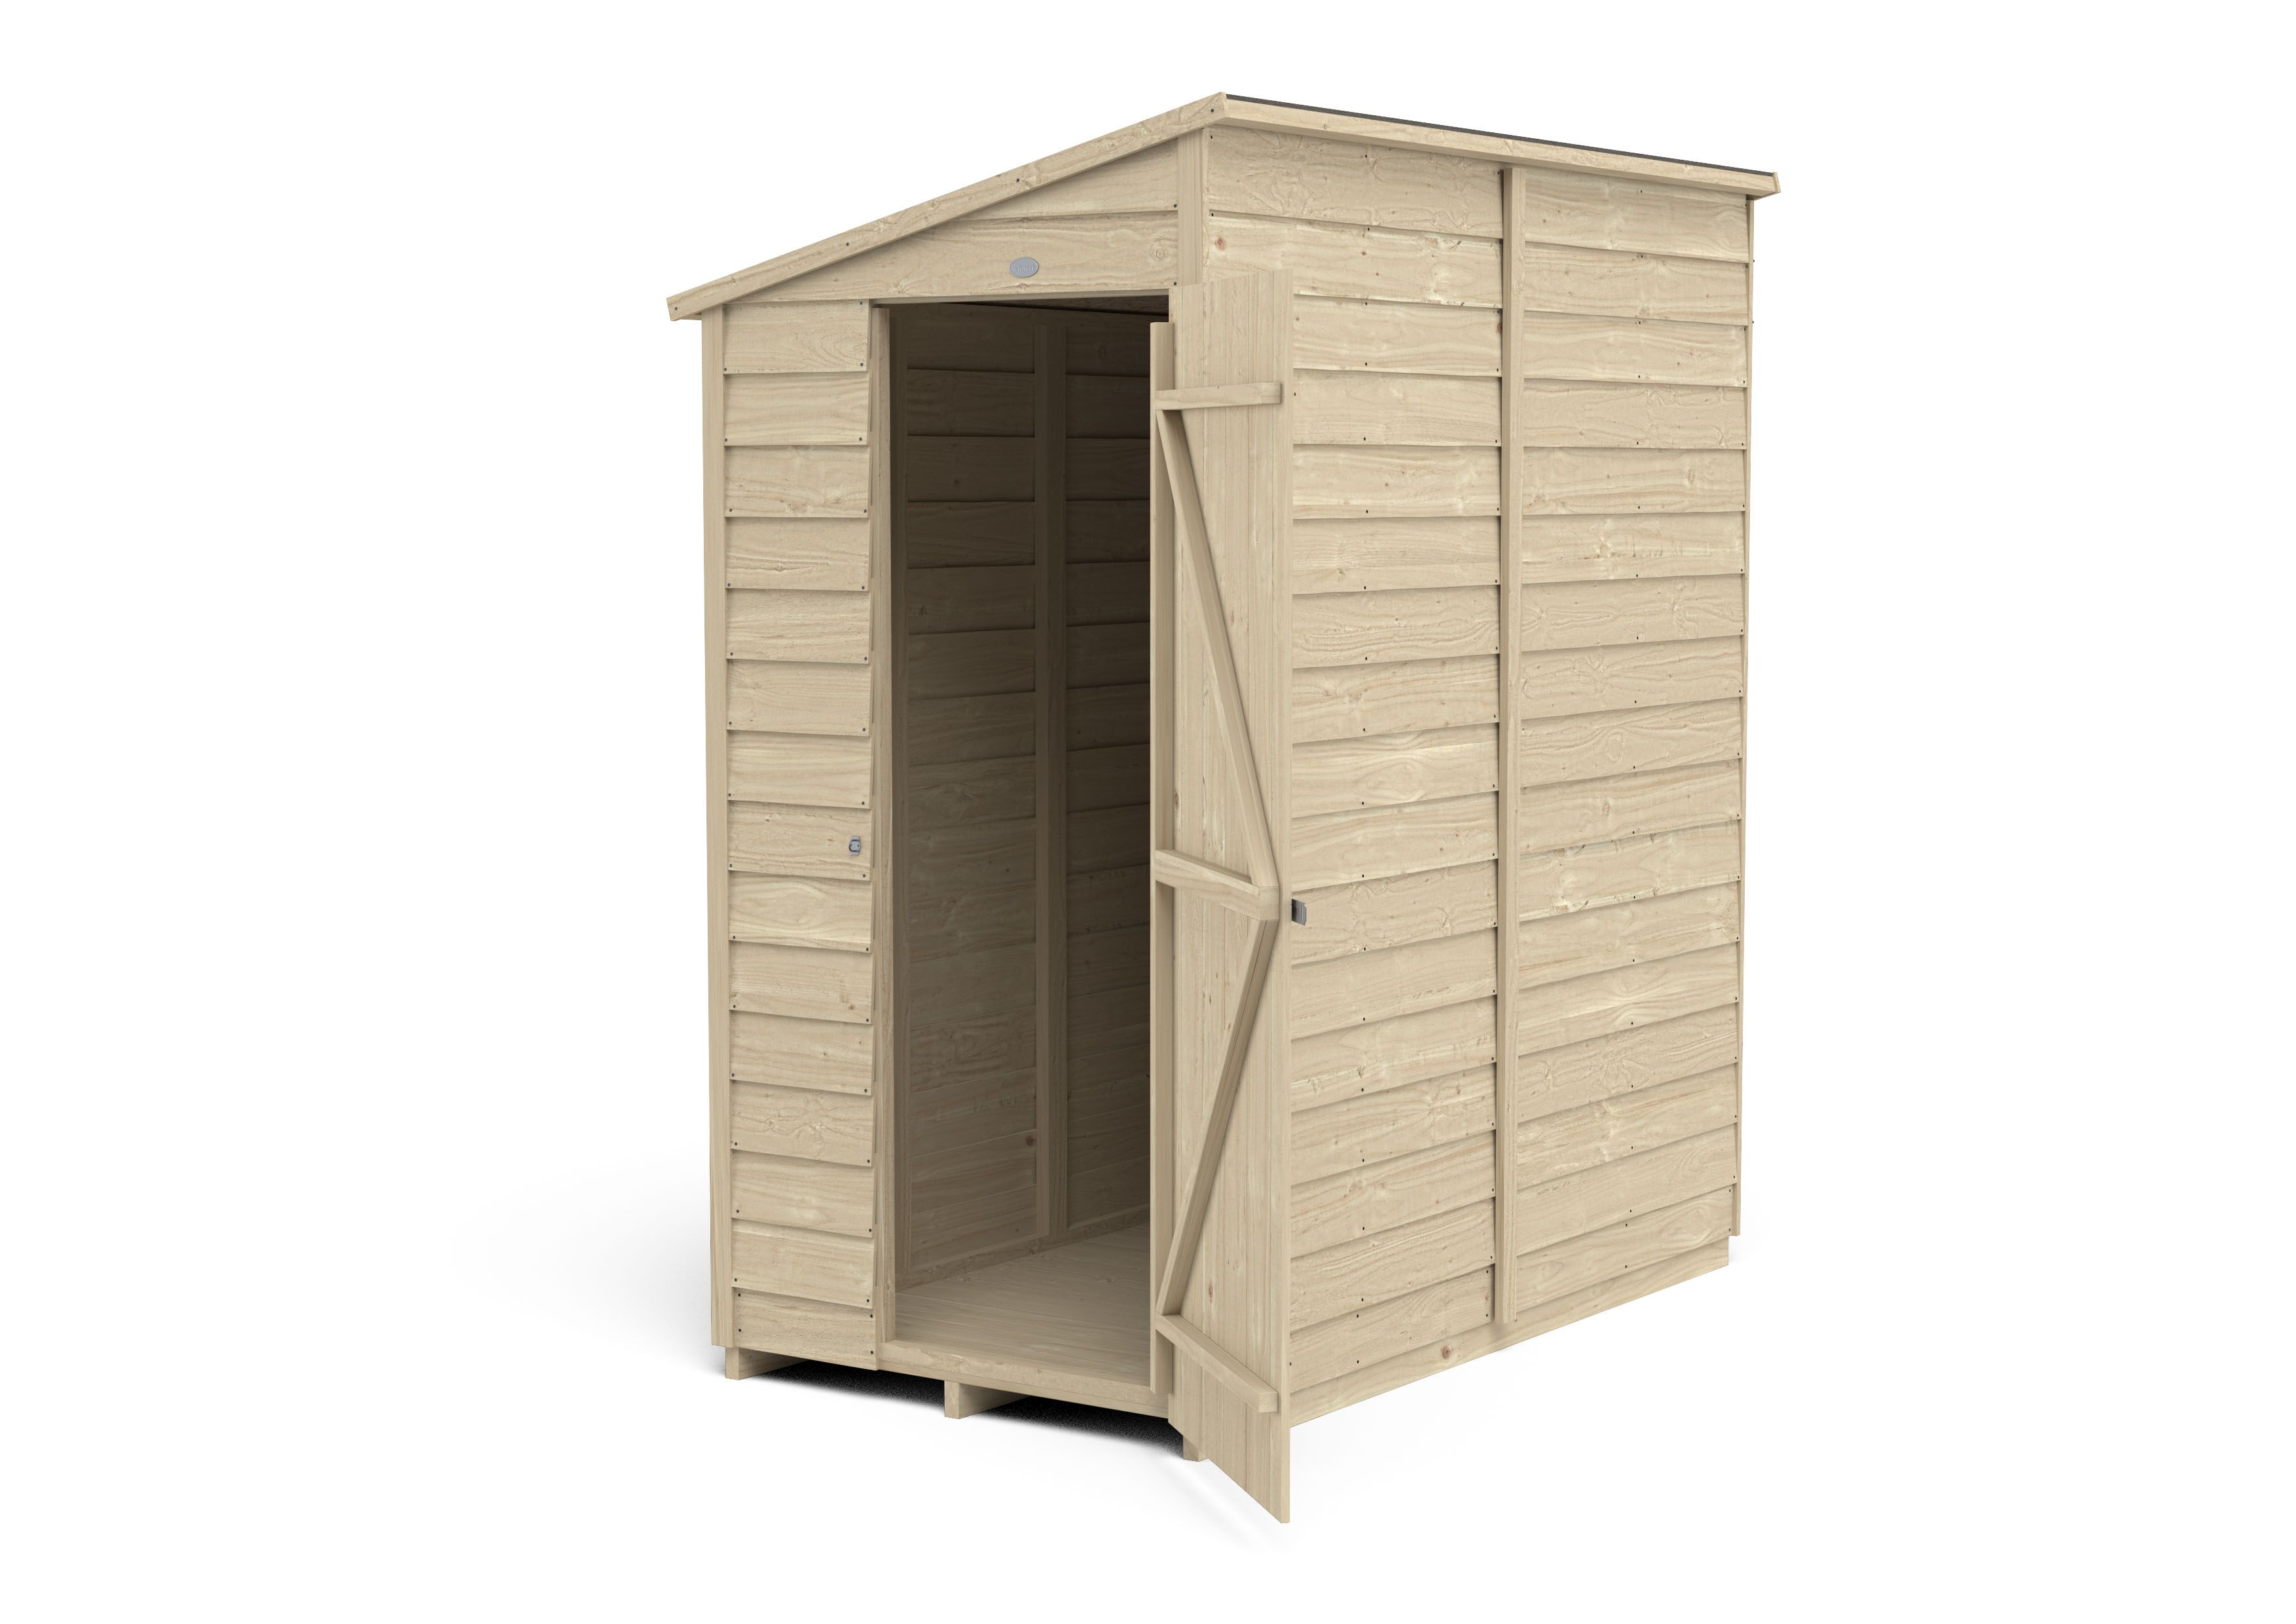 Forest Garden 6x3 ft Pent Wooden Shed with floor